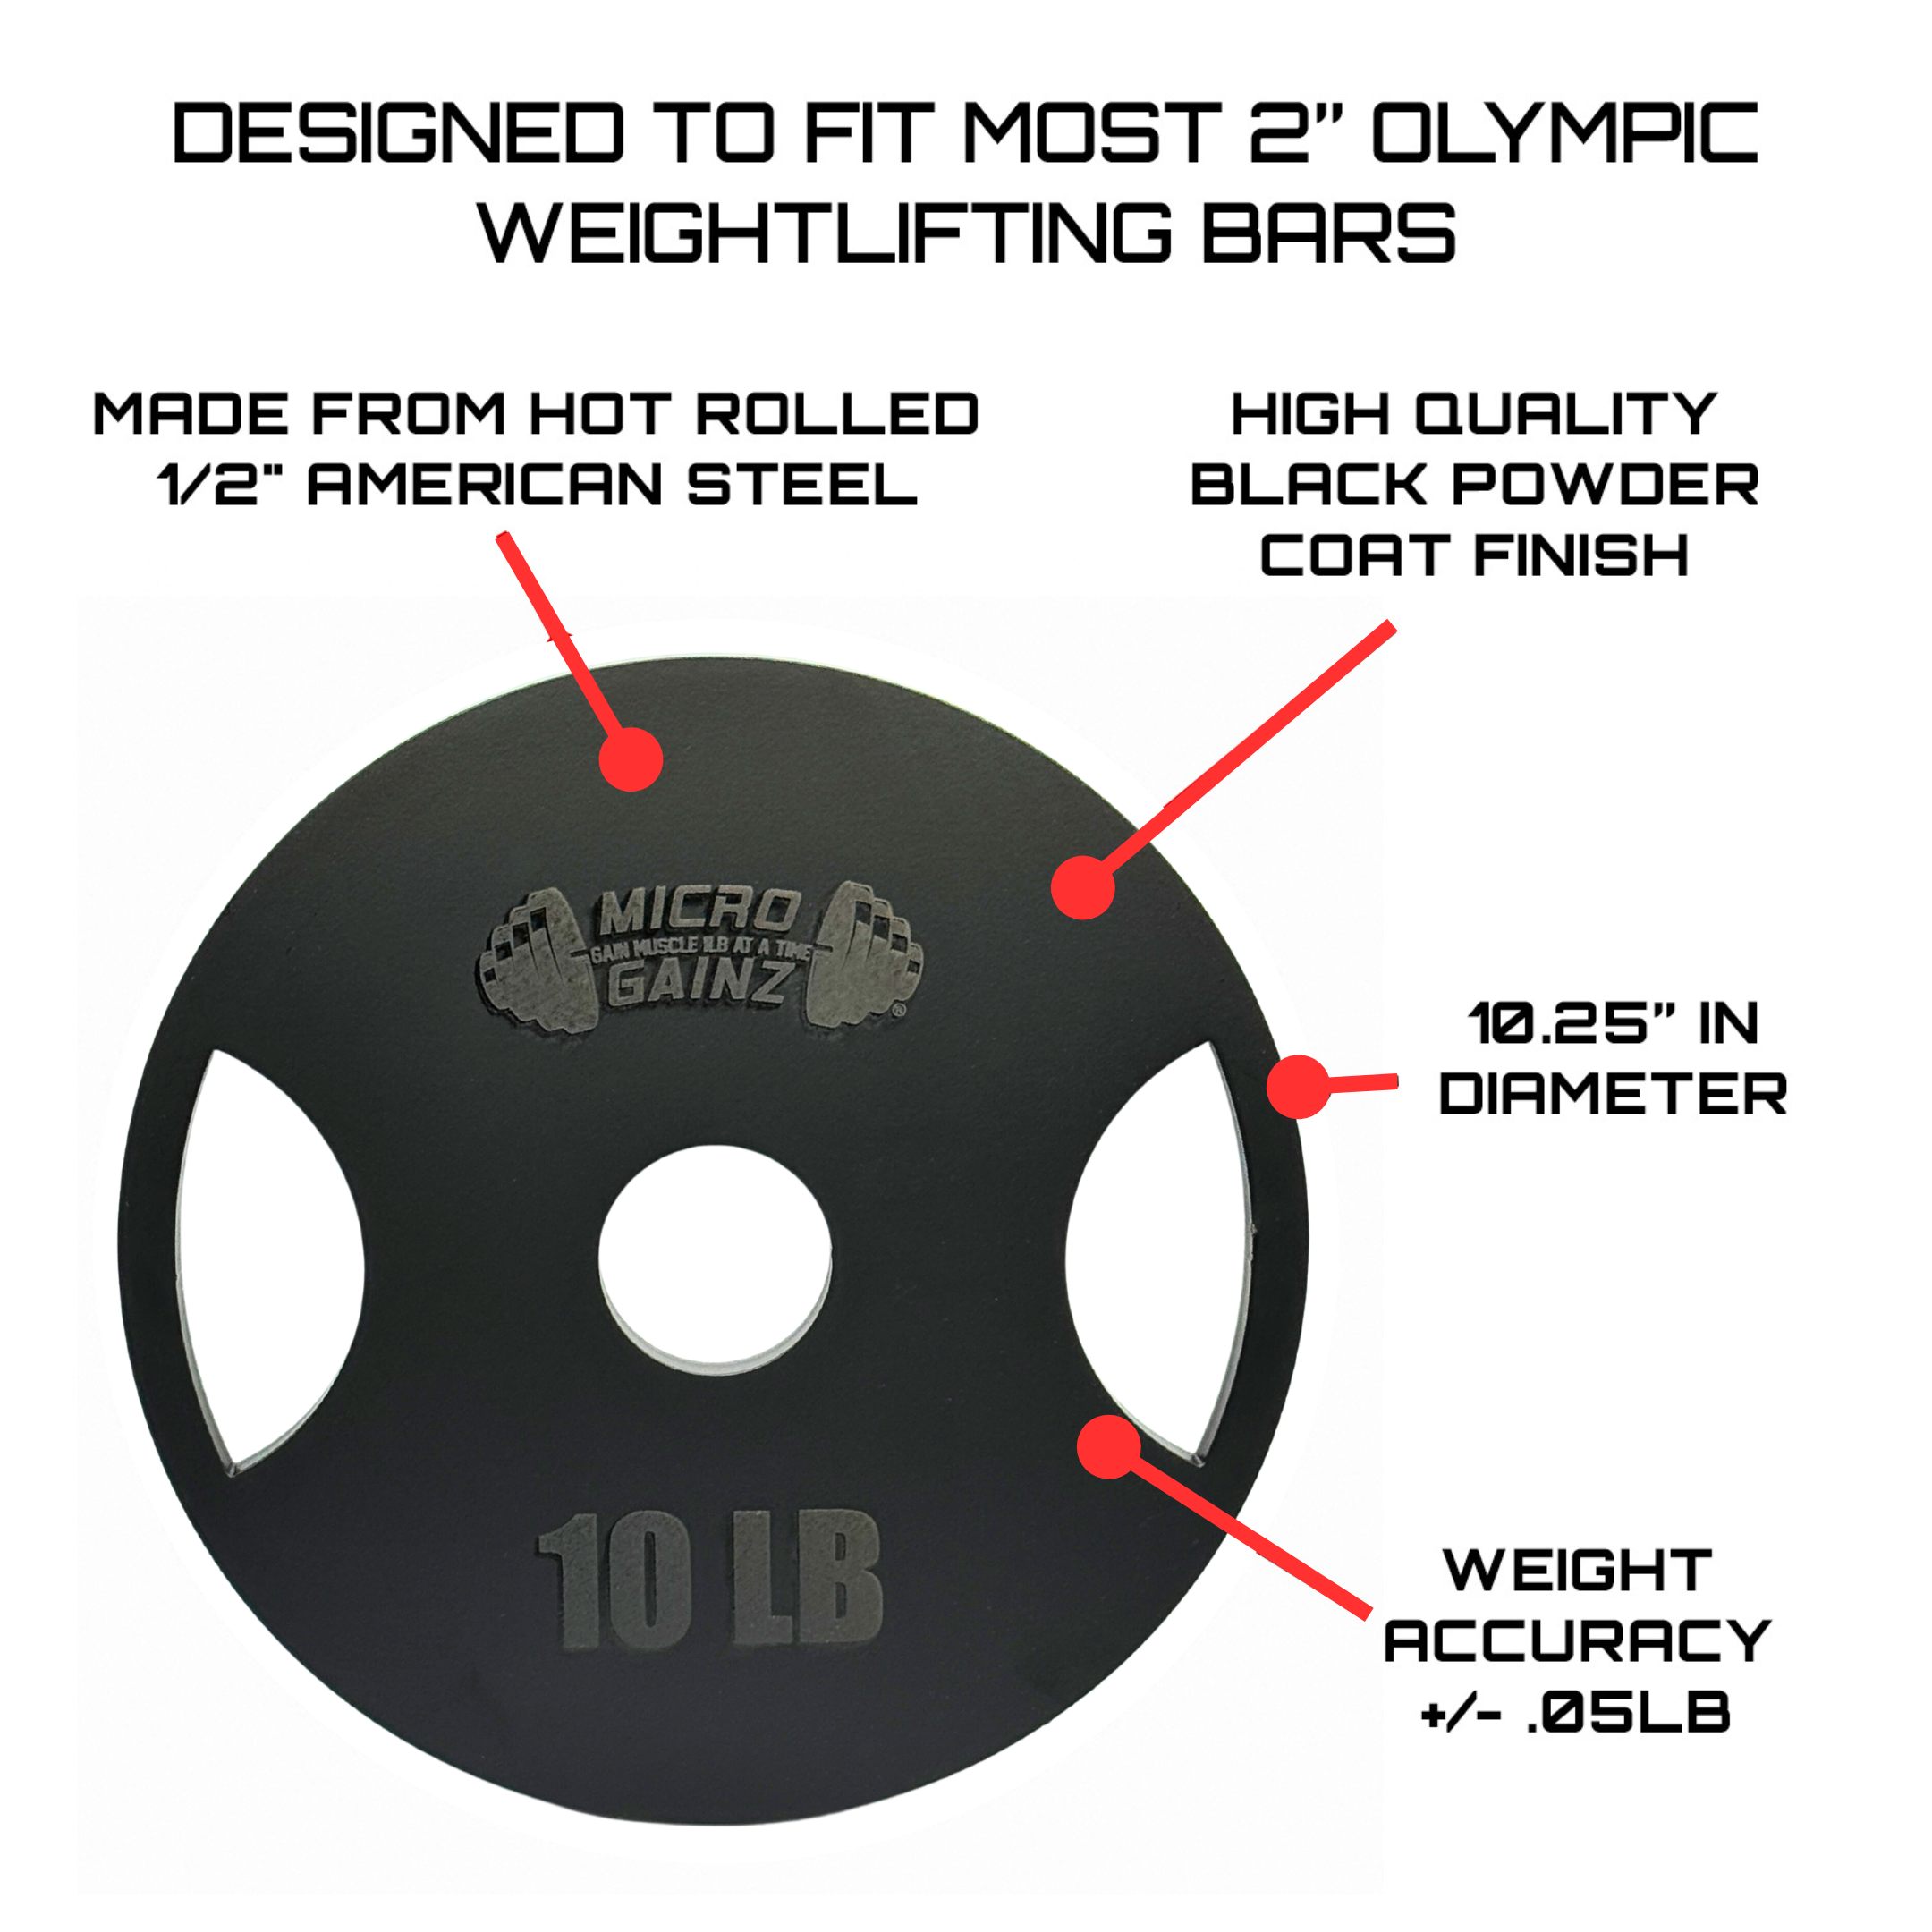 Micro Gainz Steel Olympic Weight Plates Pair of 10LB Plates